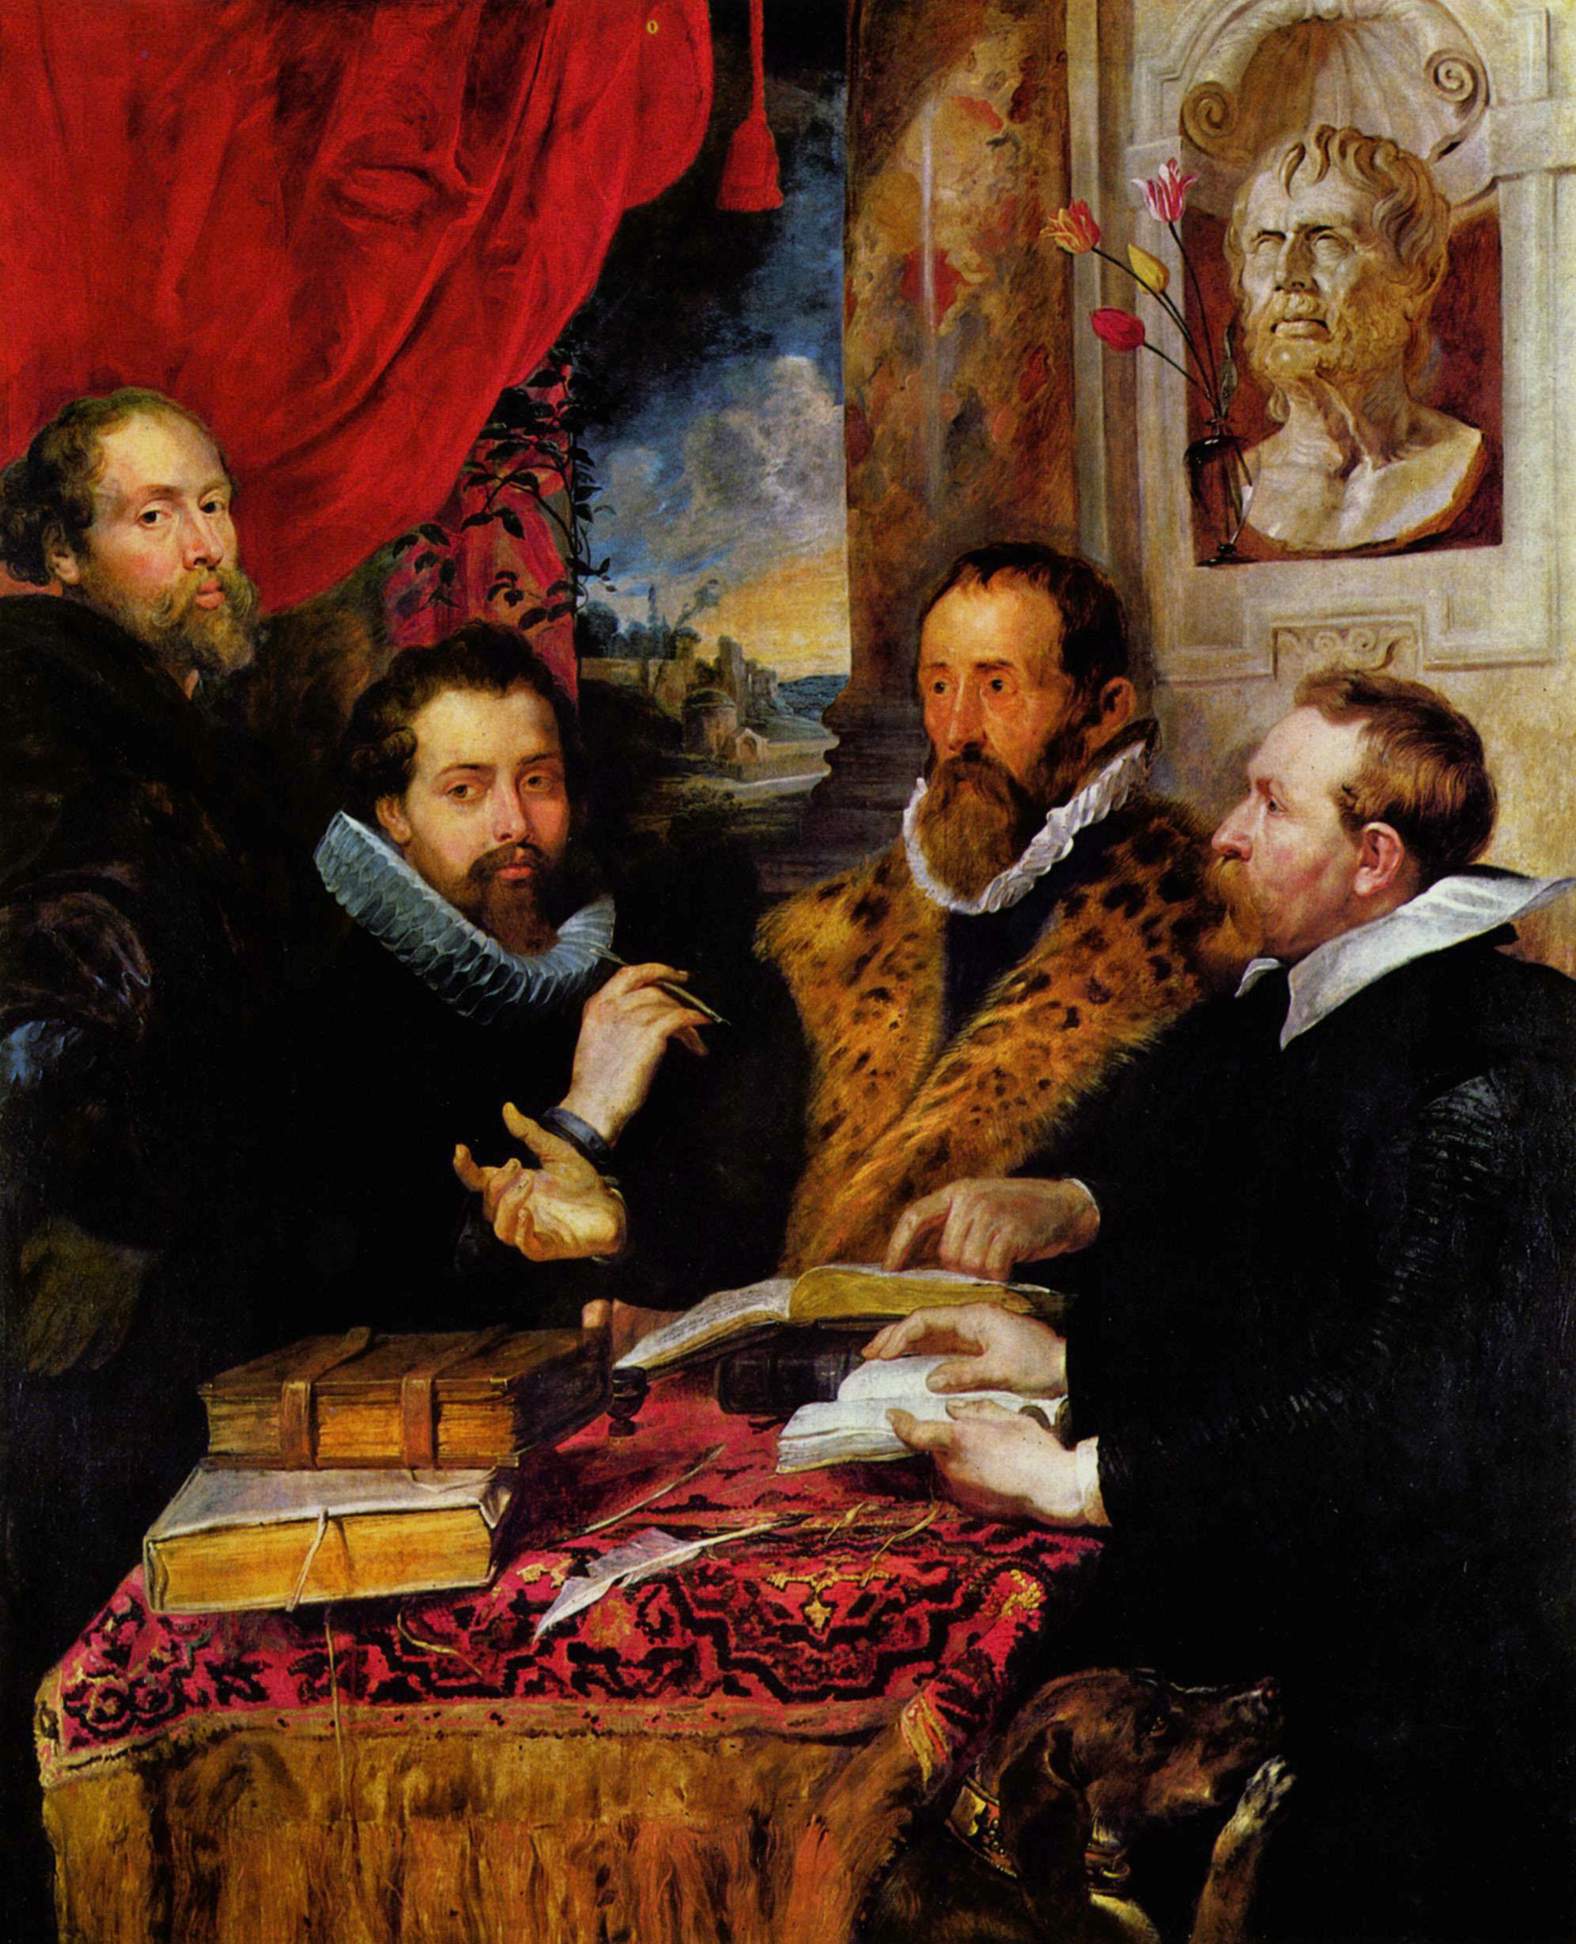 The Four Philosophers by Rubens